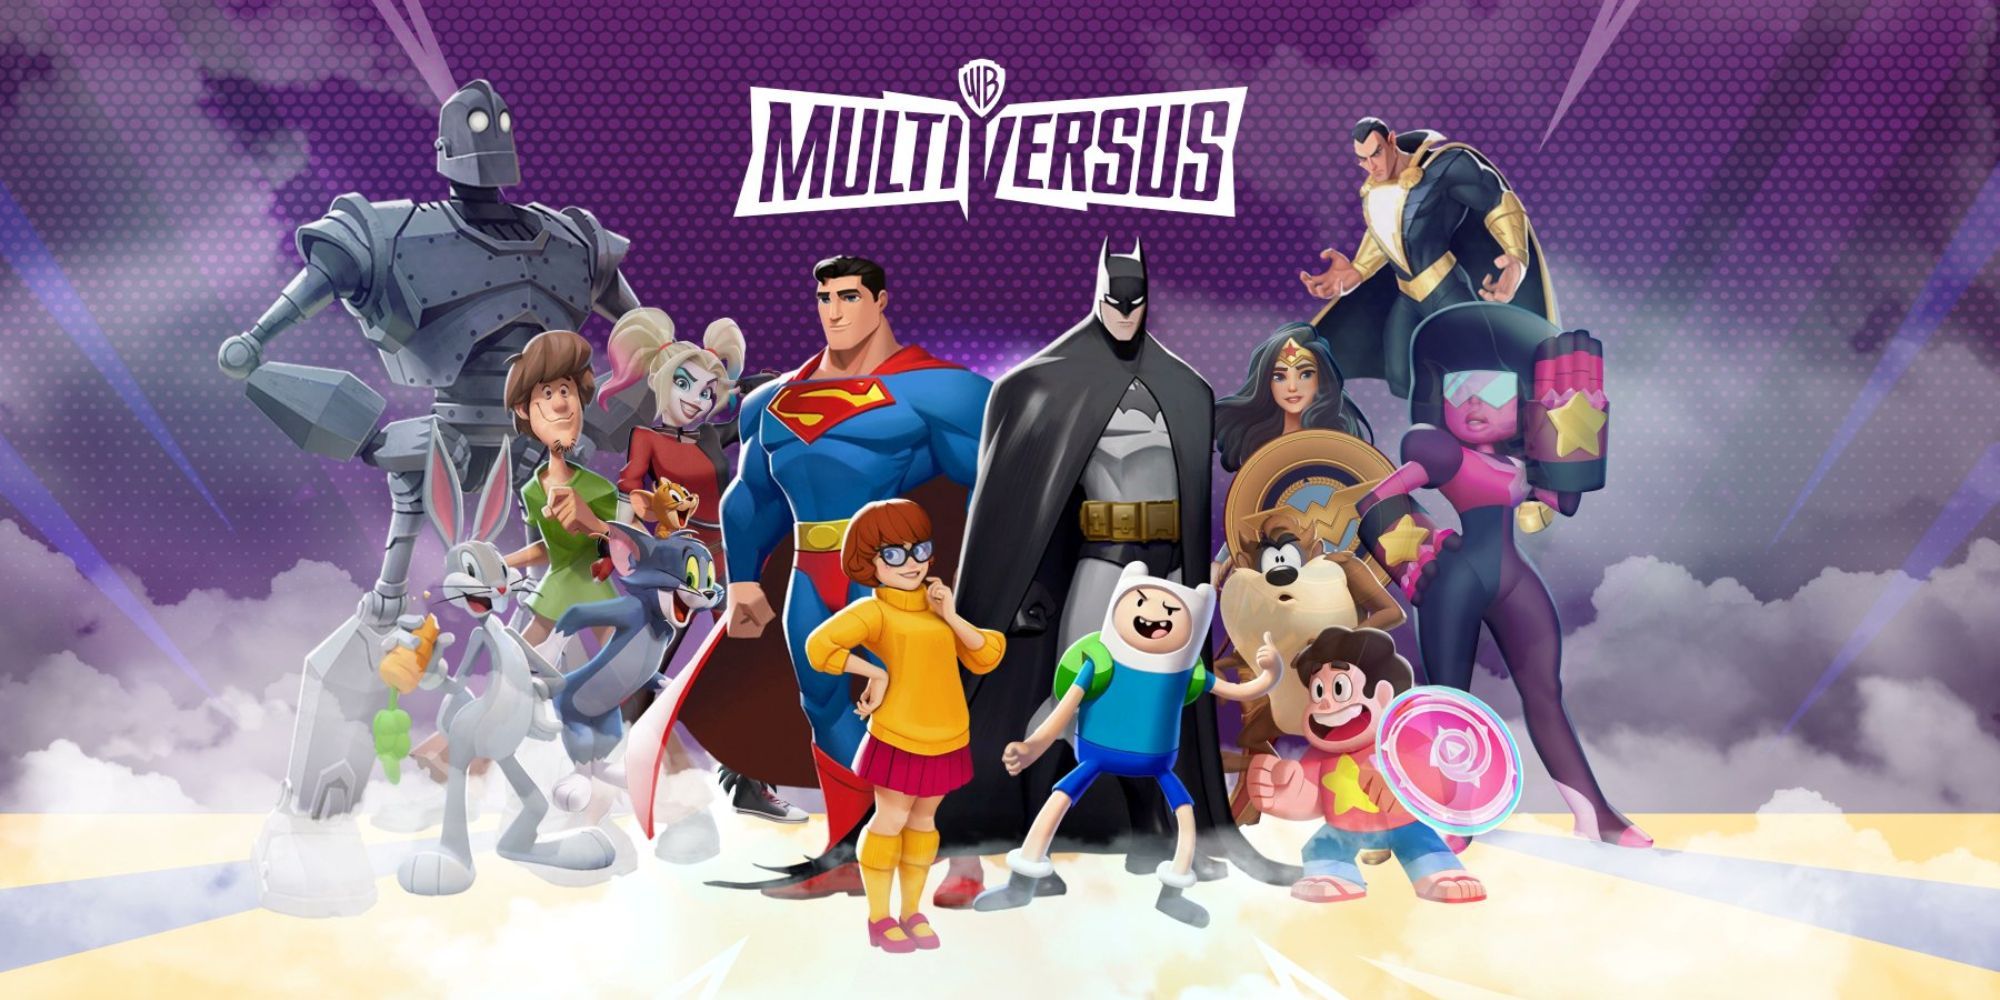 Key art for the MultiVersus McDonald's crossover.